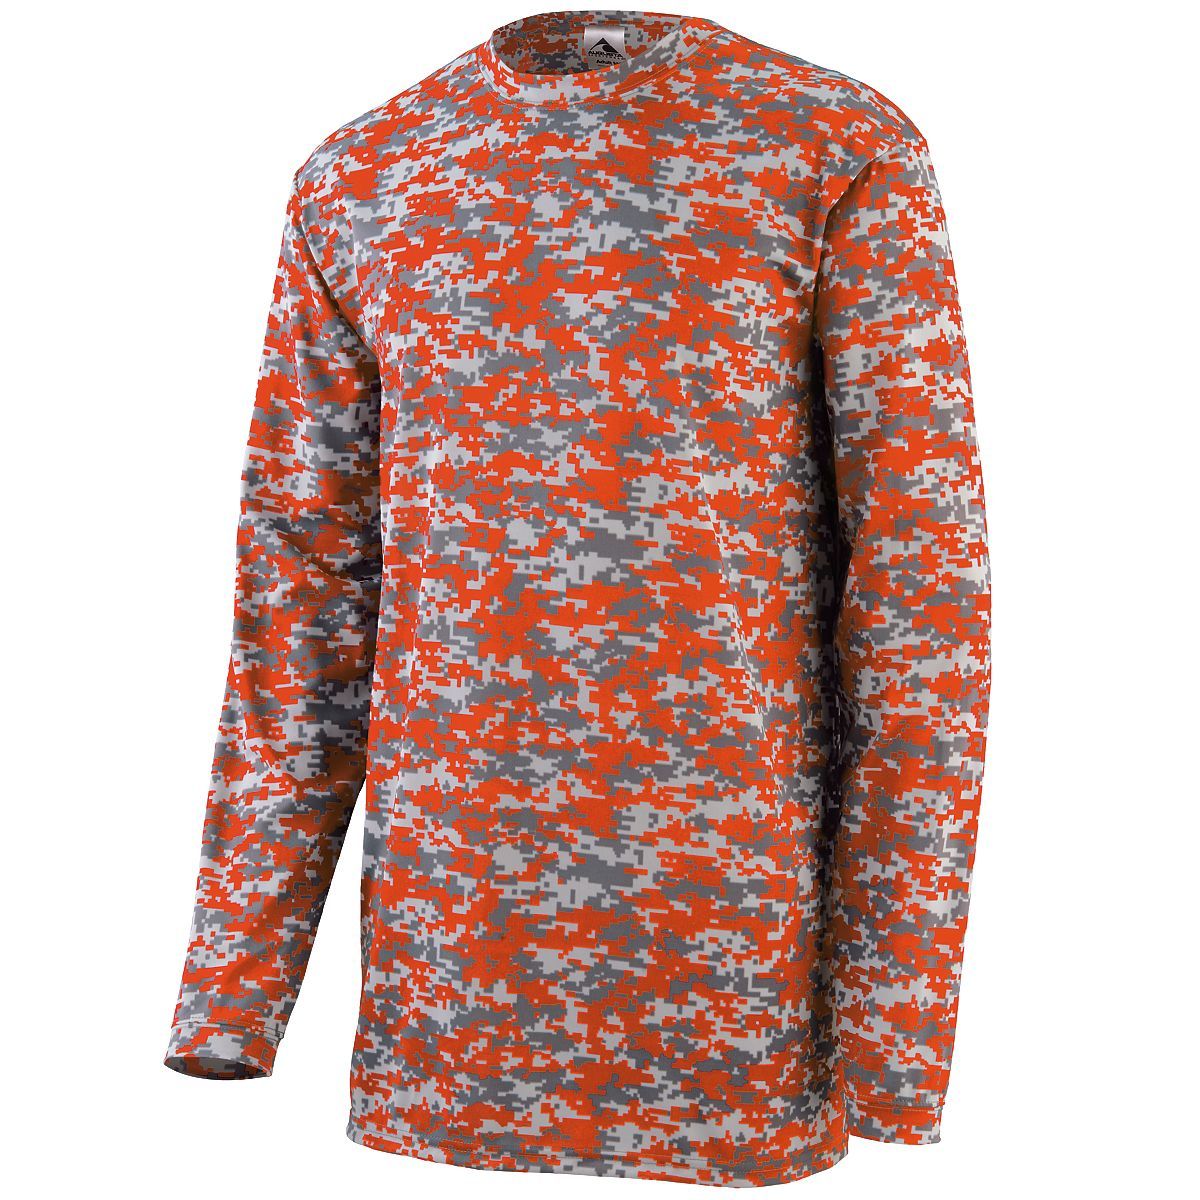 Augusta Sportswear Youth Digi Camo Wicking Long Sleeve T-Shirt in Orange Digi  -Part of the Youth, Youth-Tee-Shirt, T-Shirts, Augusta-Products, Shirts product lines at KanaleyCreations.com